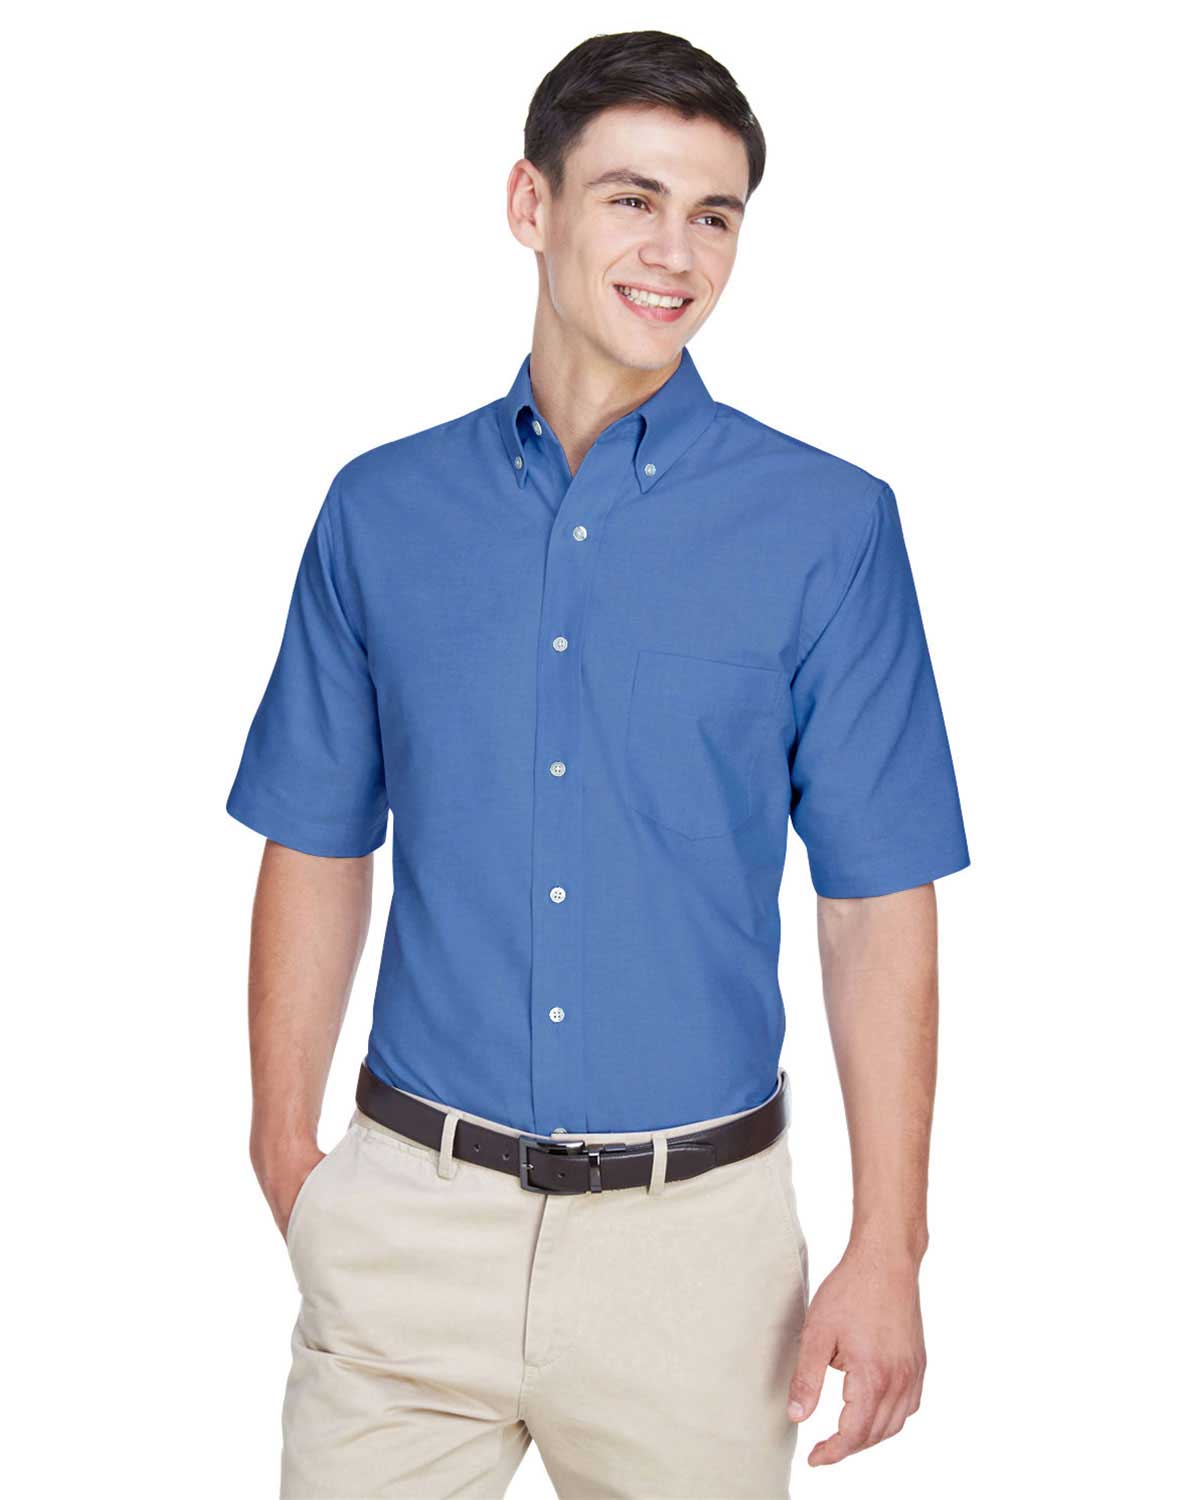 Ultraclub 8972 Men Classic Wrinkle-Free Short-Sleeve Oxford at Apparelstation